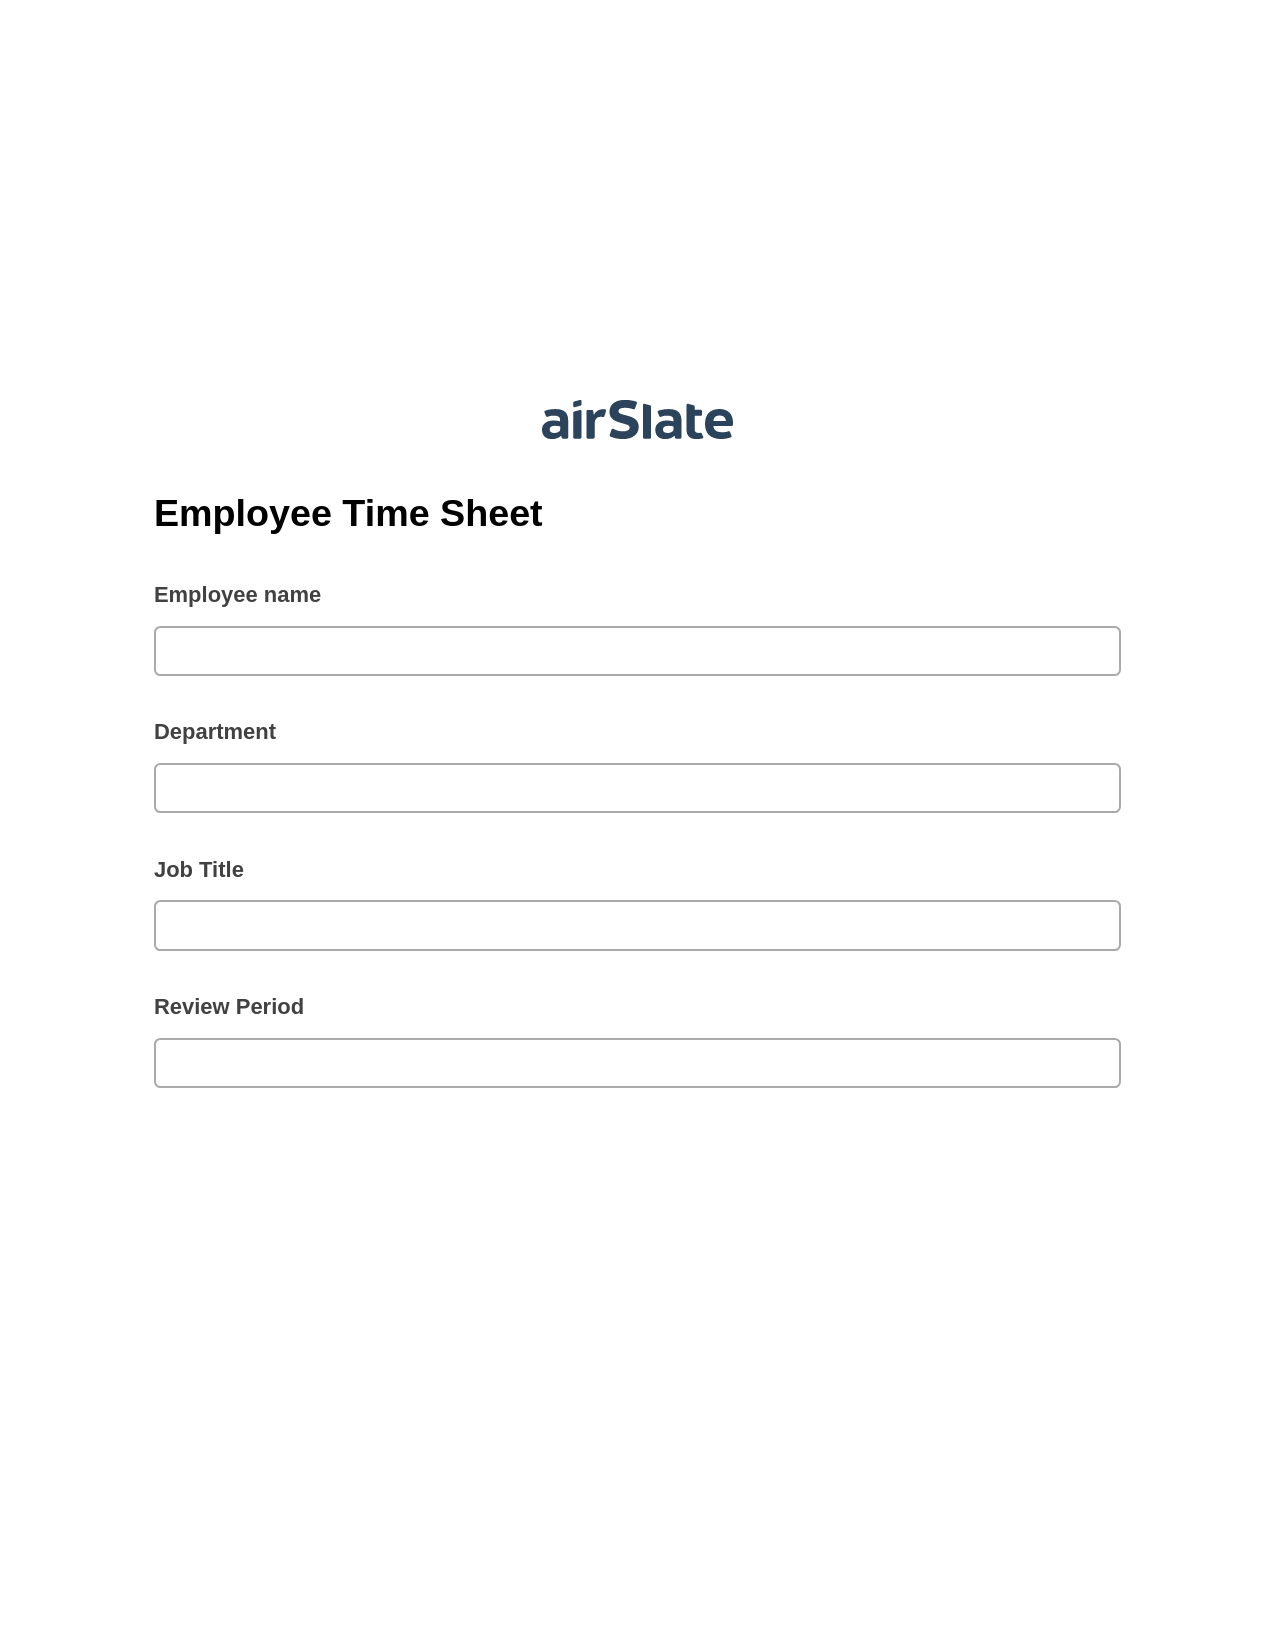 Employee Time Sheet Pre-fill Dropdowns from Airtable, Create slate addon, Export to Google Sheet Bot